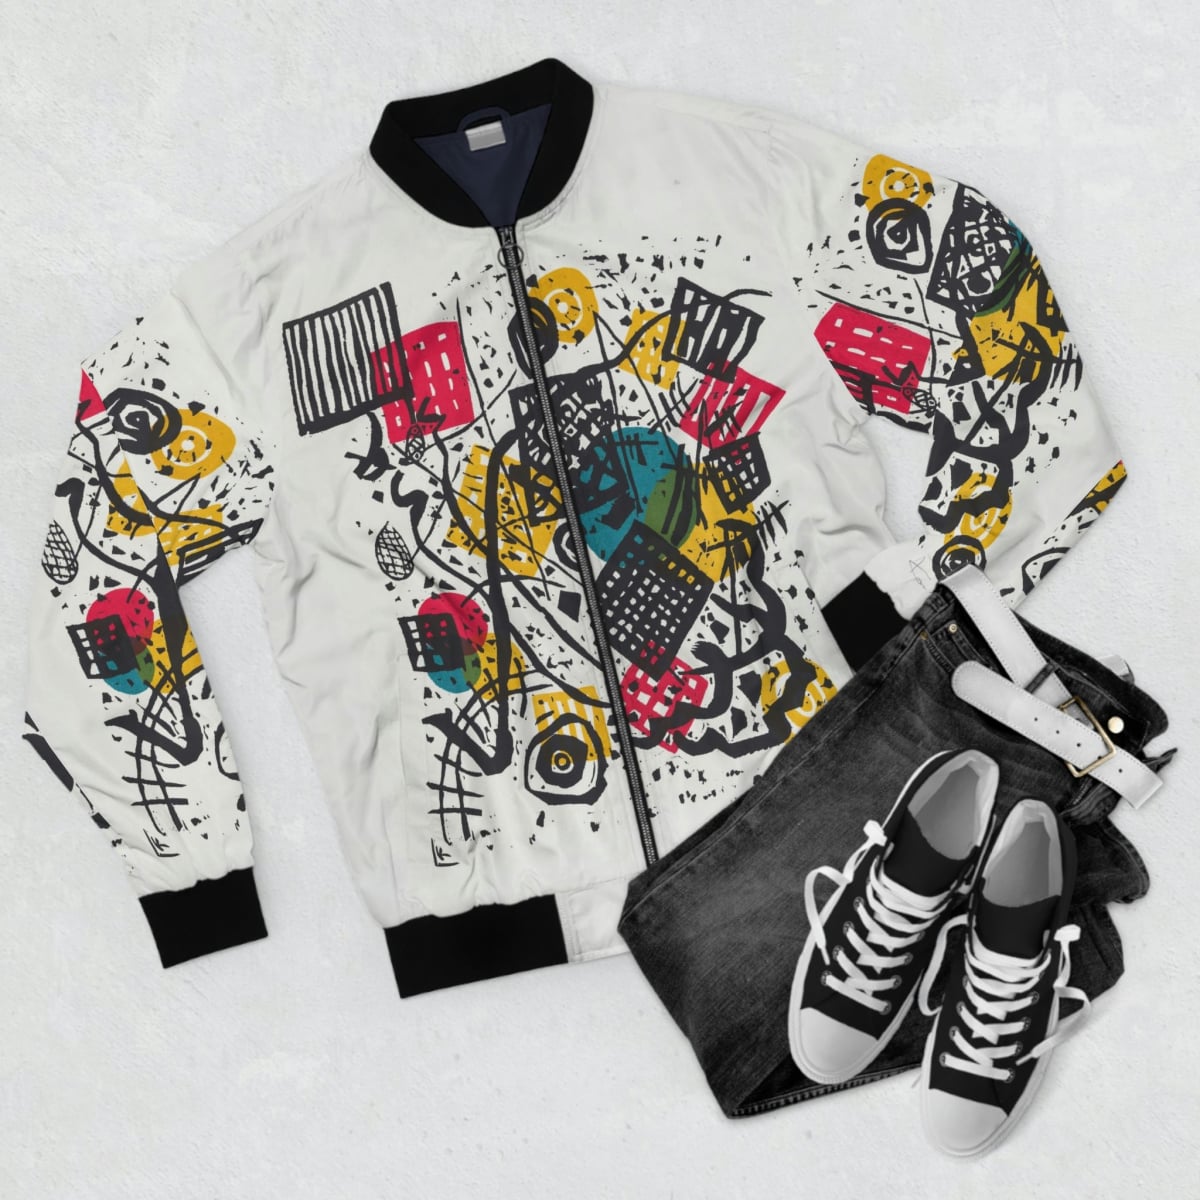 Small Worlds V Bomber Jacket - Painting by Wassily Kandinsky